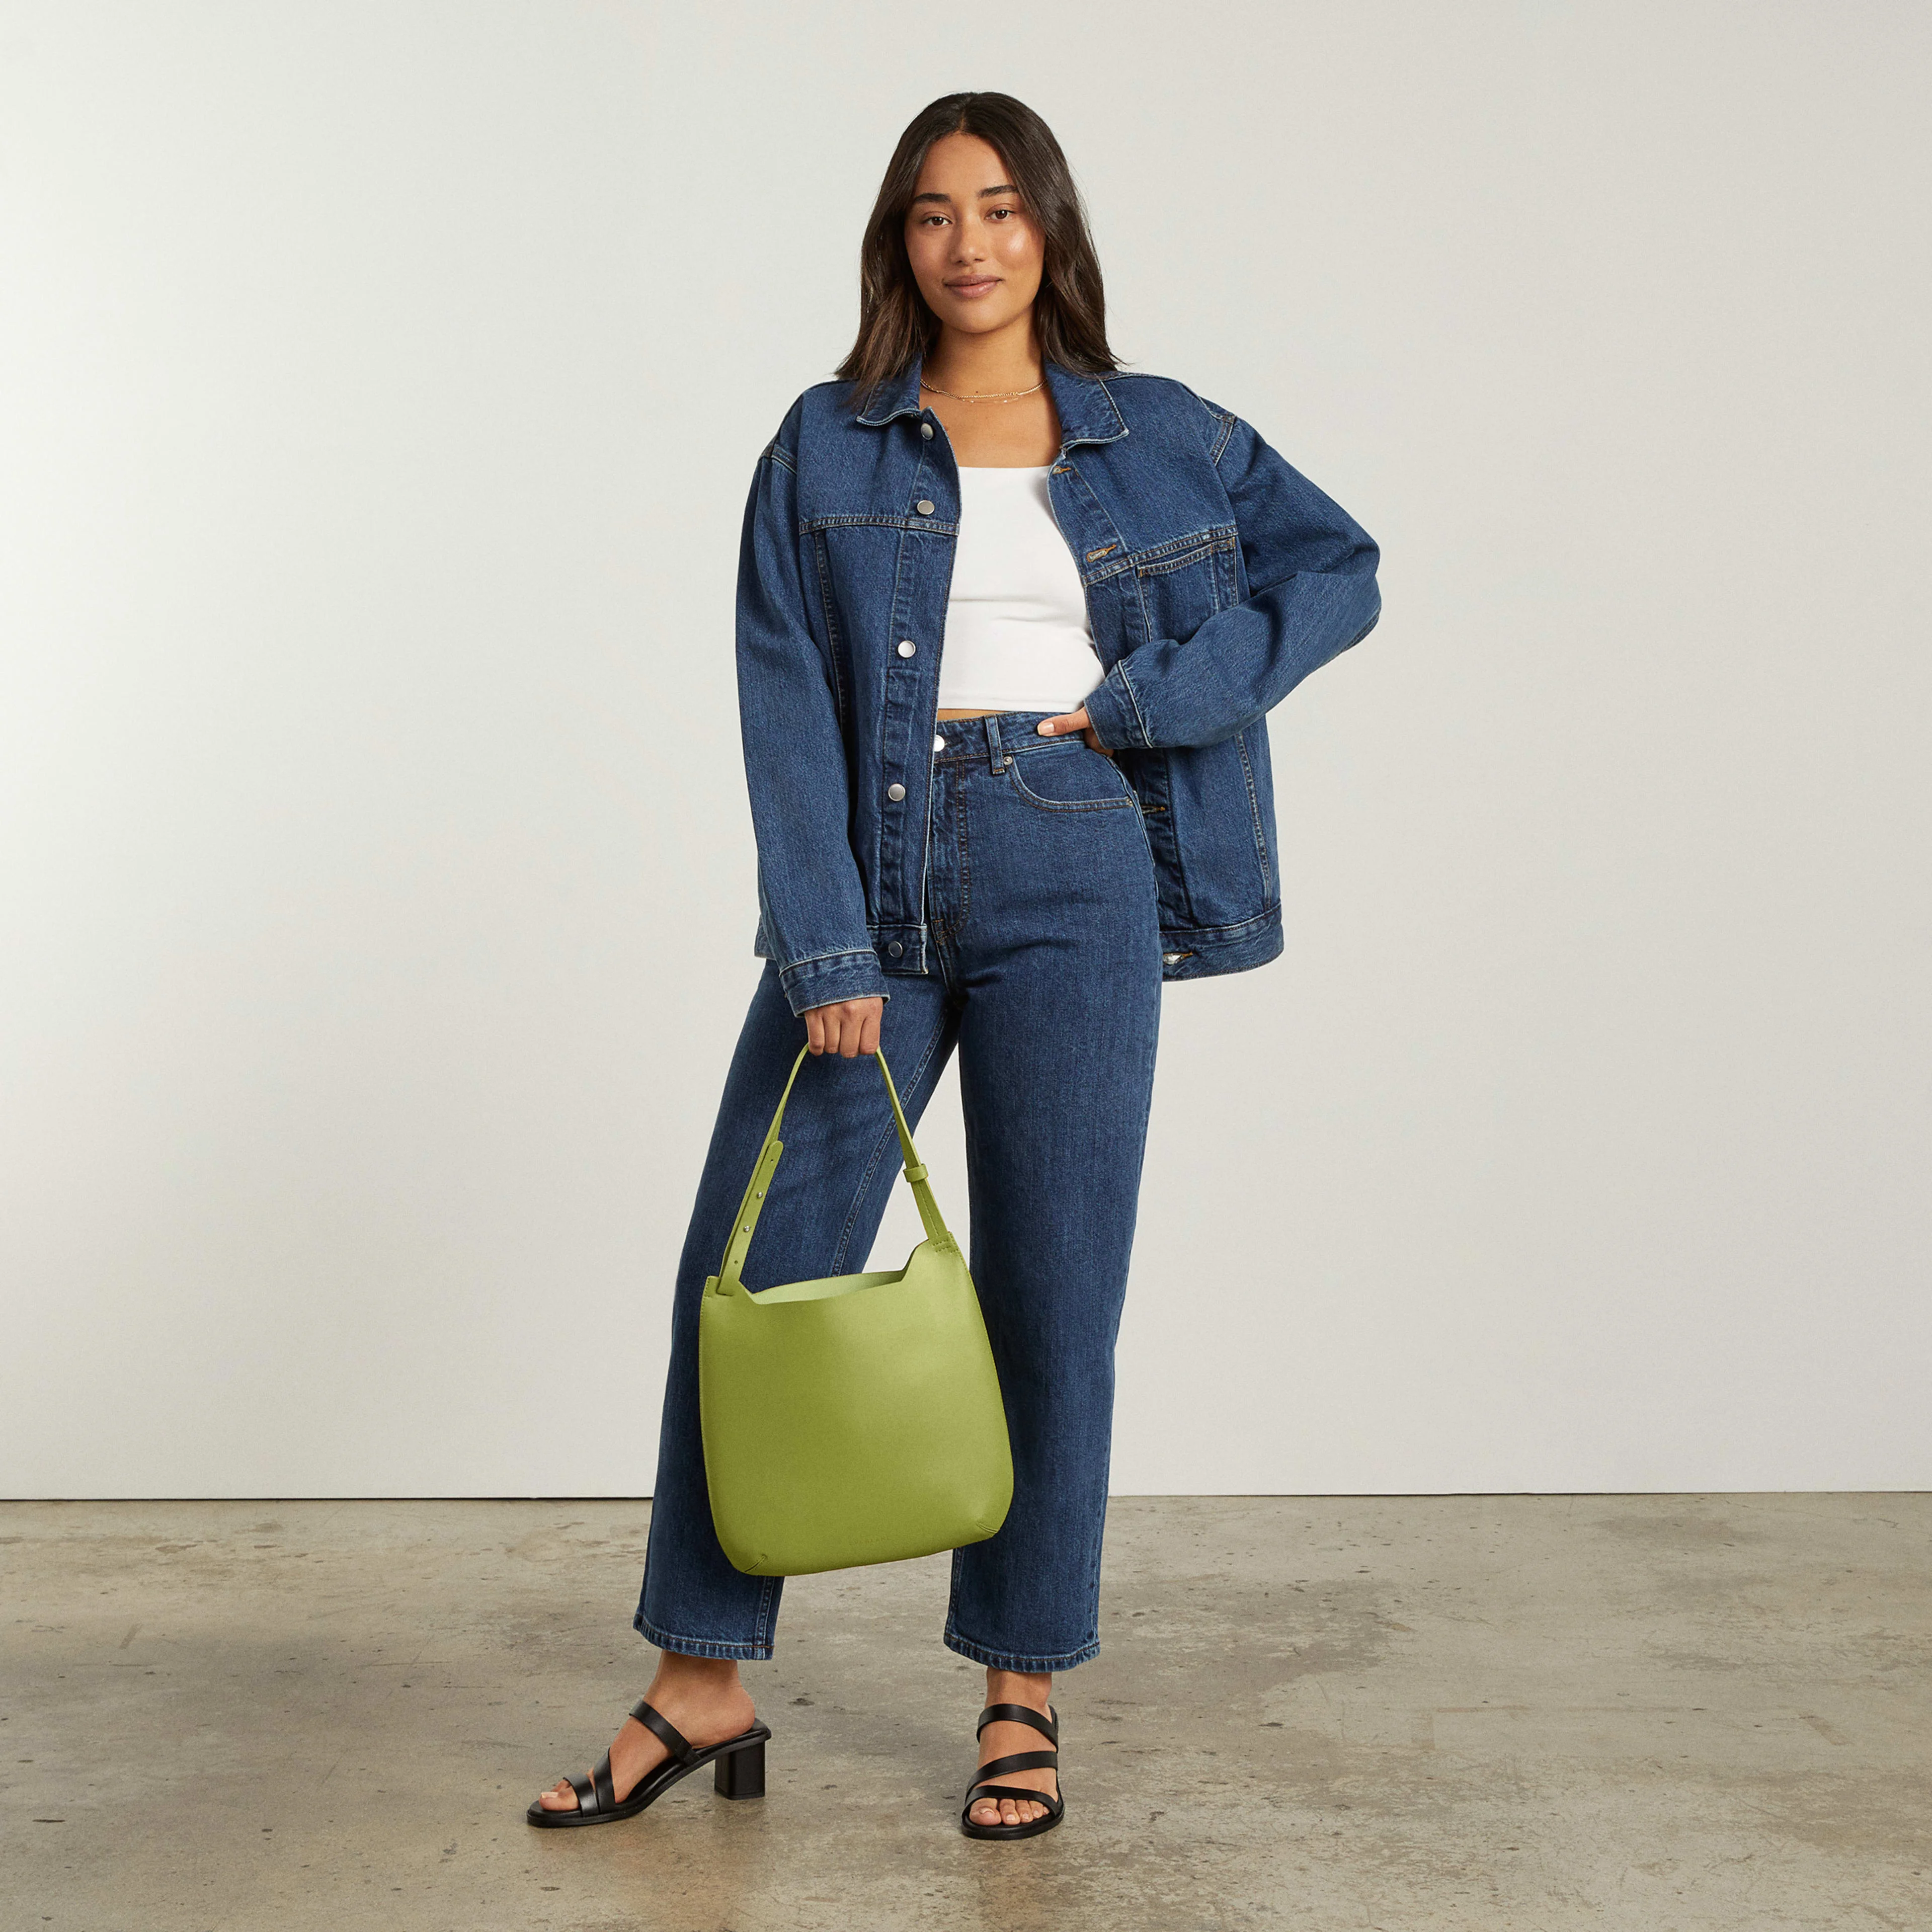 Review: Is Everlane's Cactus Leather Hobo bag worth $228?